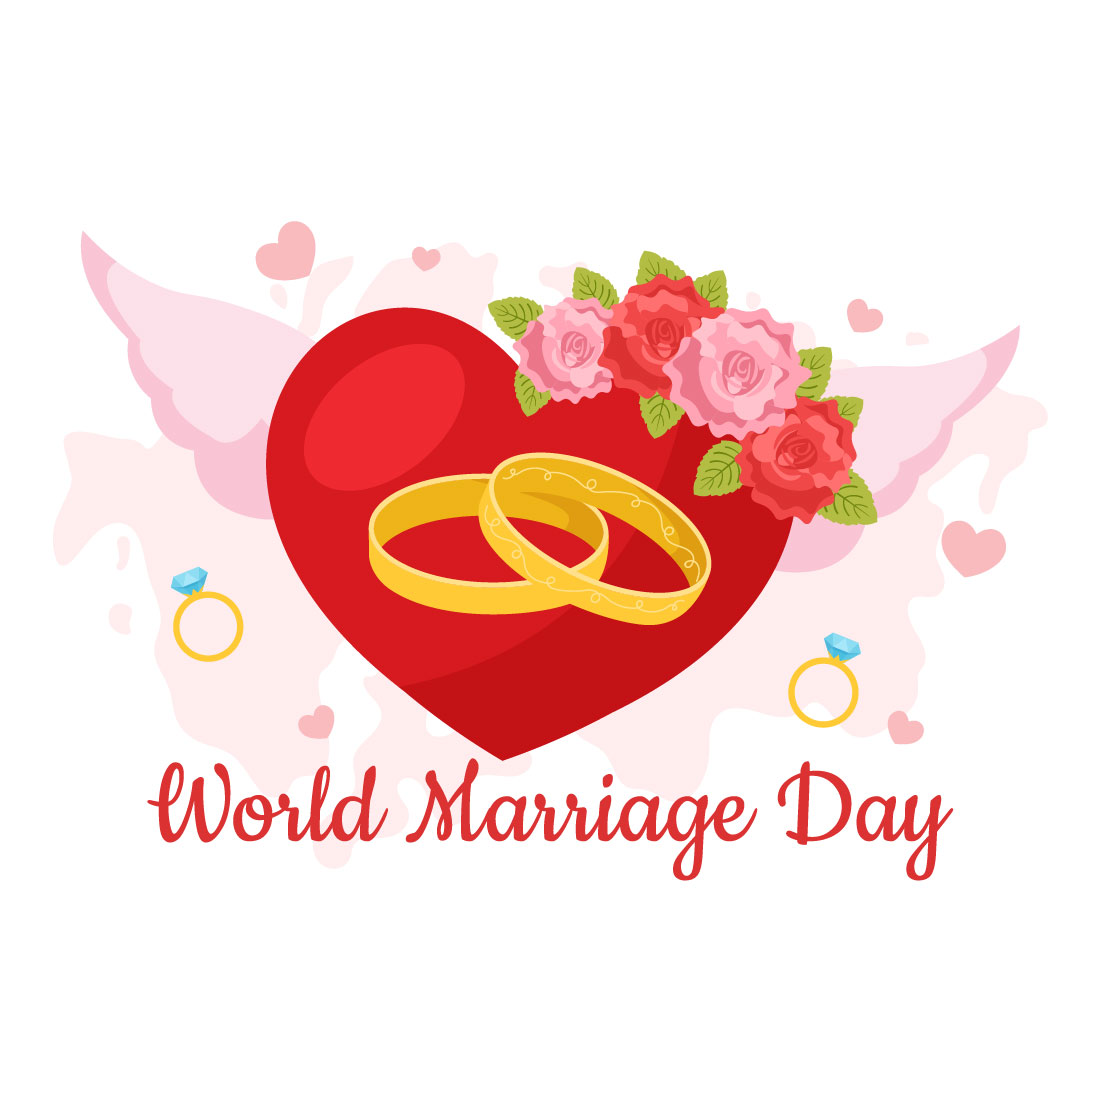 12 World Marriage Day Illustration preview image.